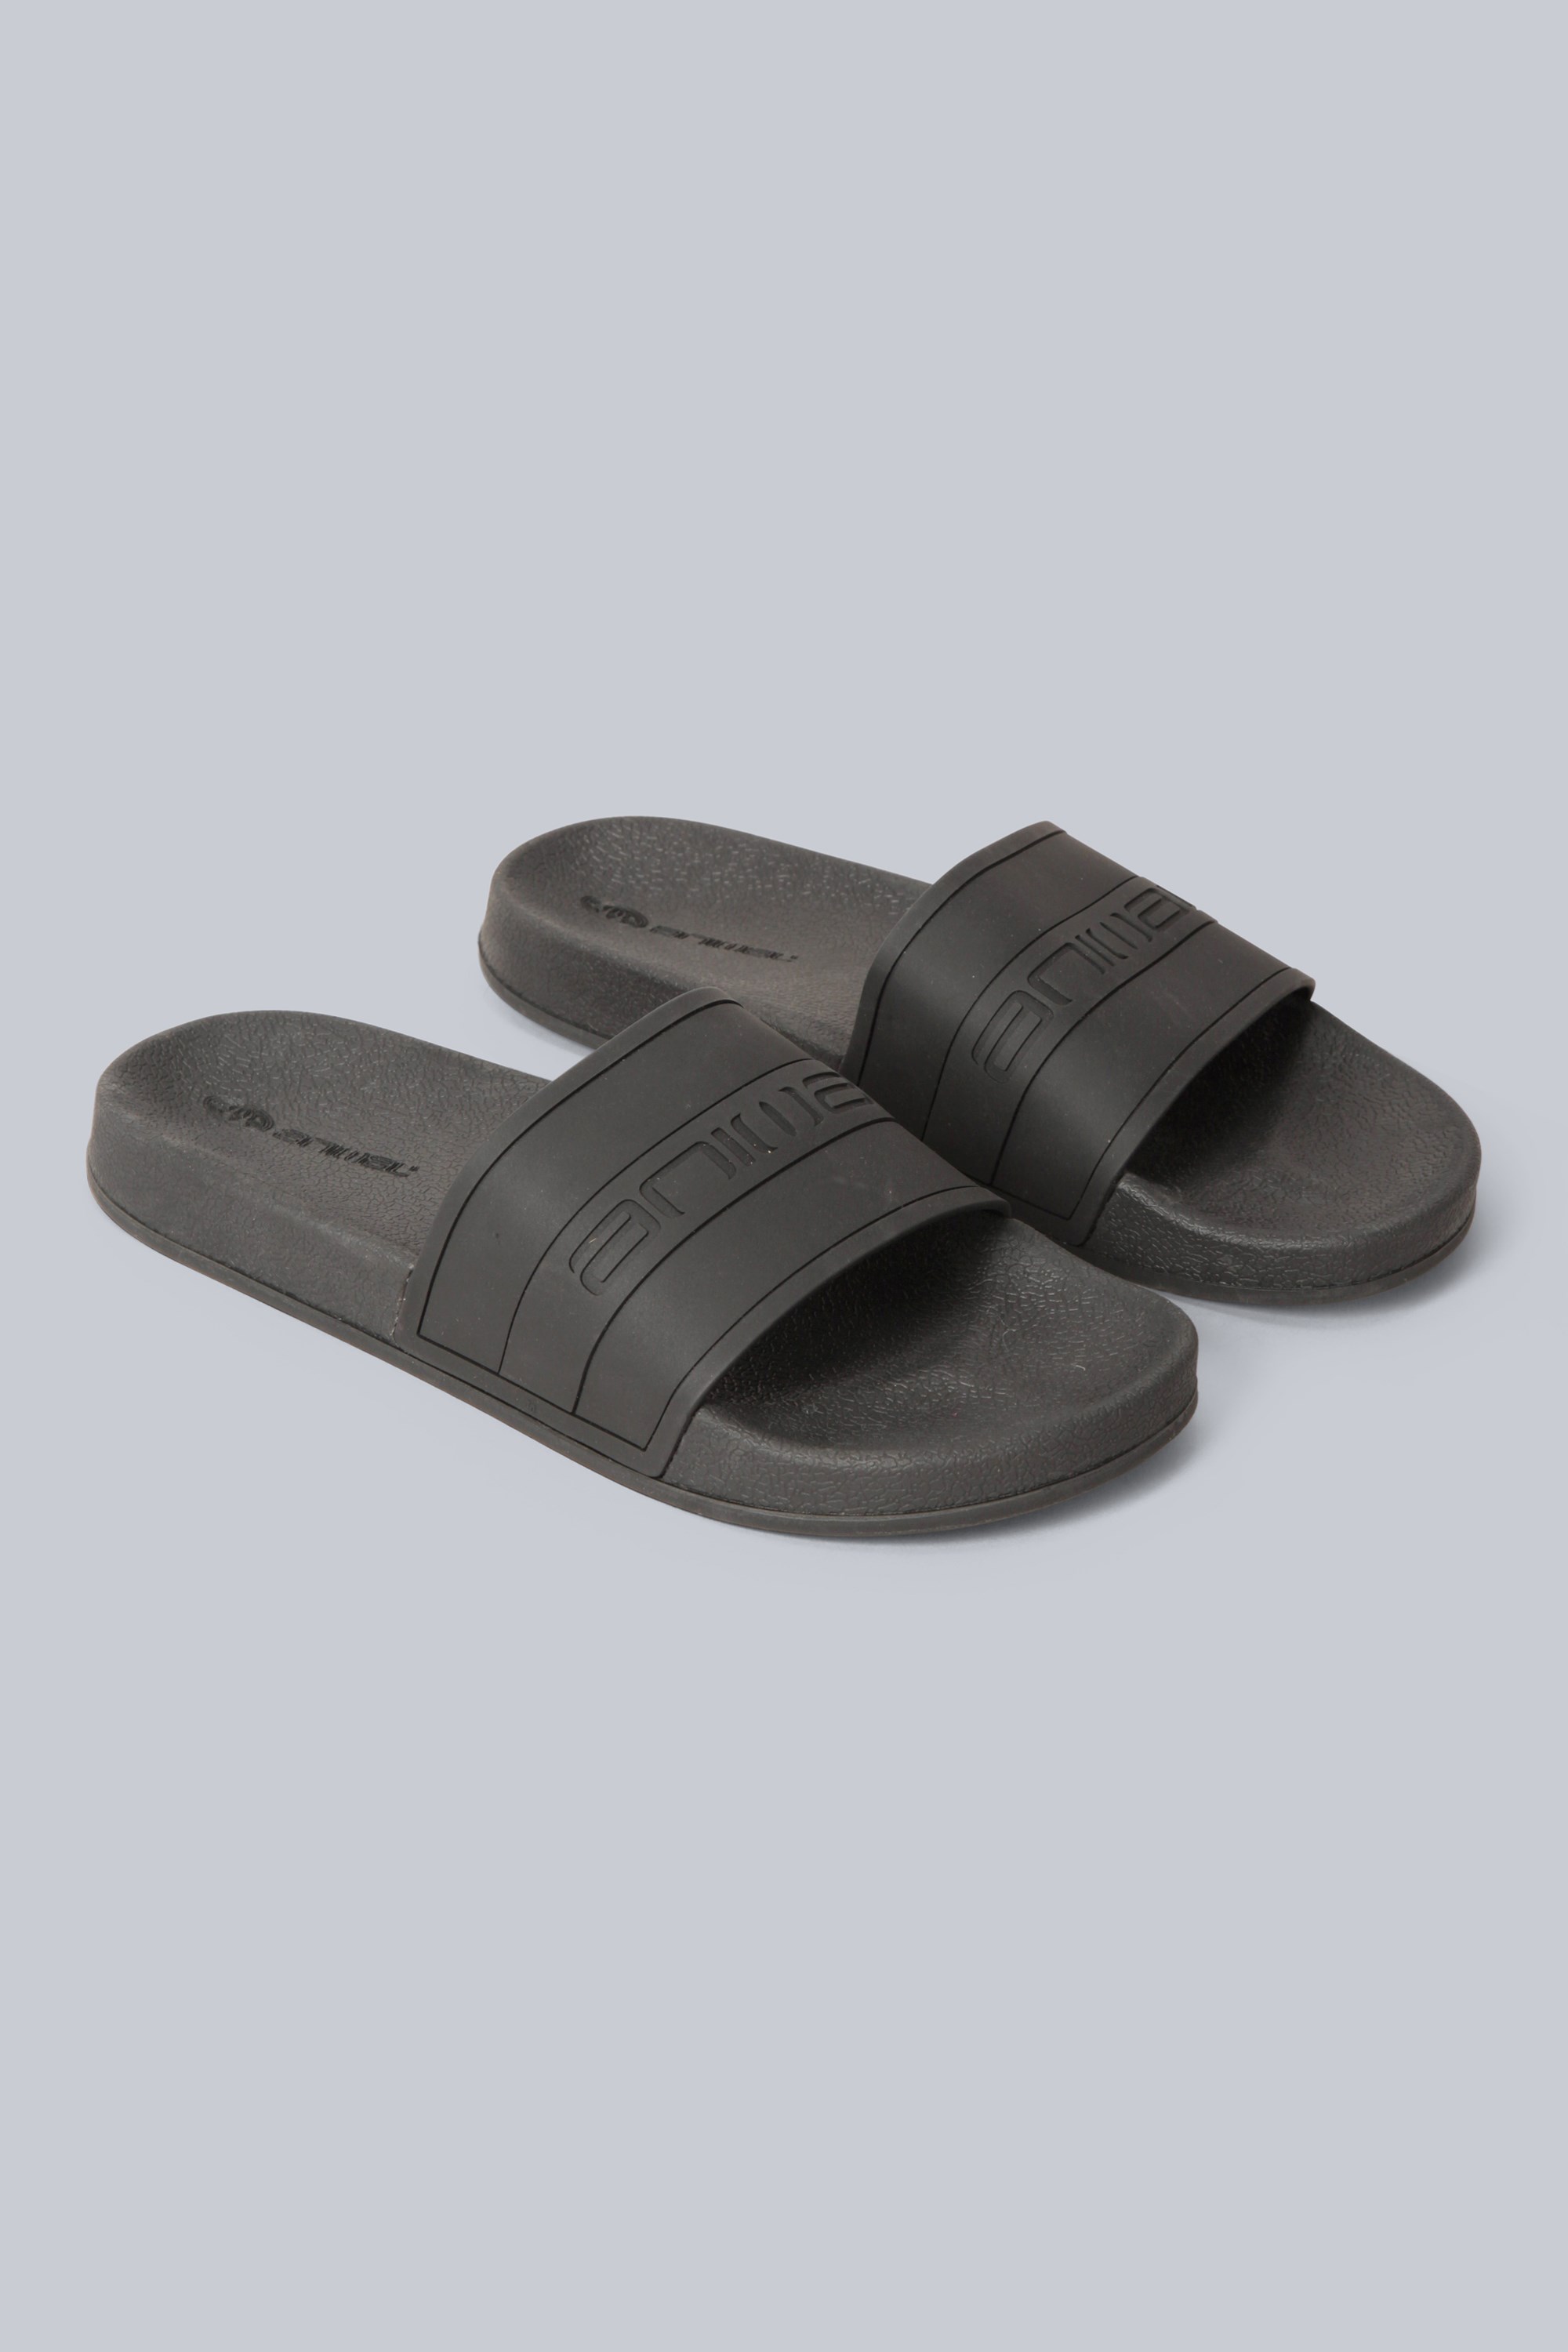 Animal Palm Mens Recycled Sliders | Mountain Warehouse GB